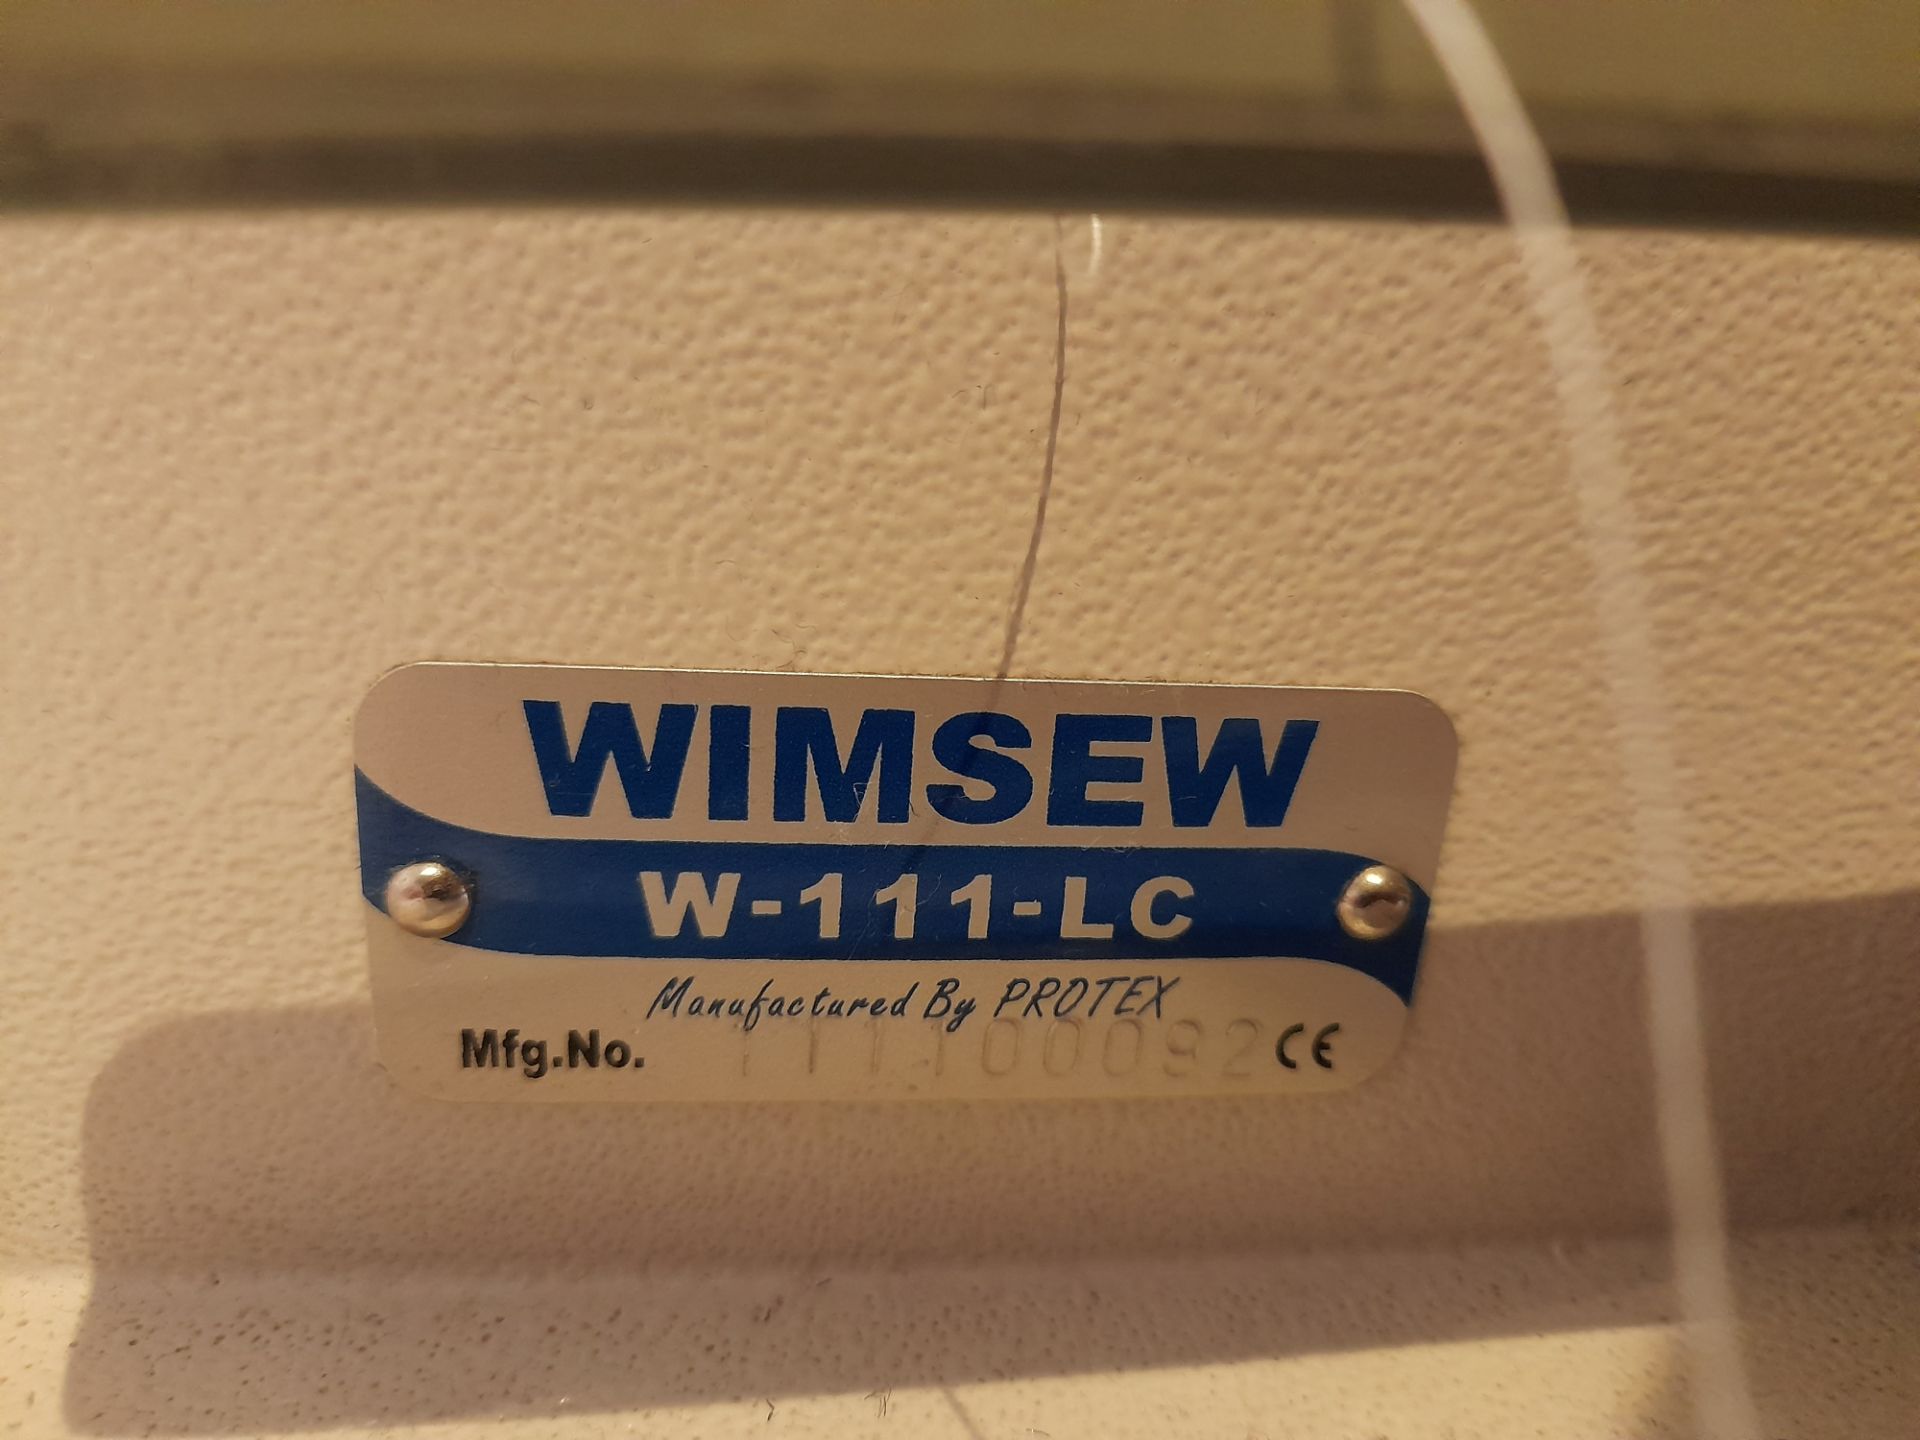 Wimsew W-111-LC single phase lockstitcher, with Industrial Sewing Machine power saving motor, - Image 4 of 7